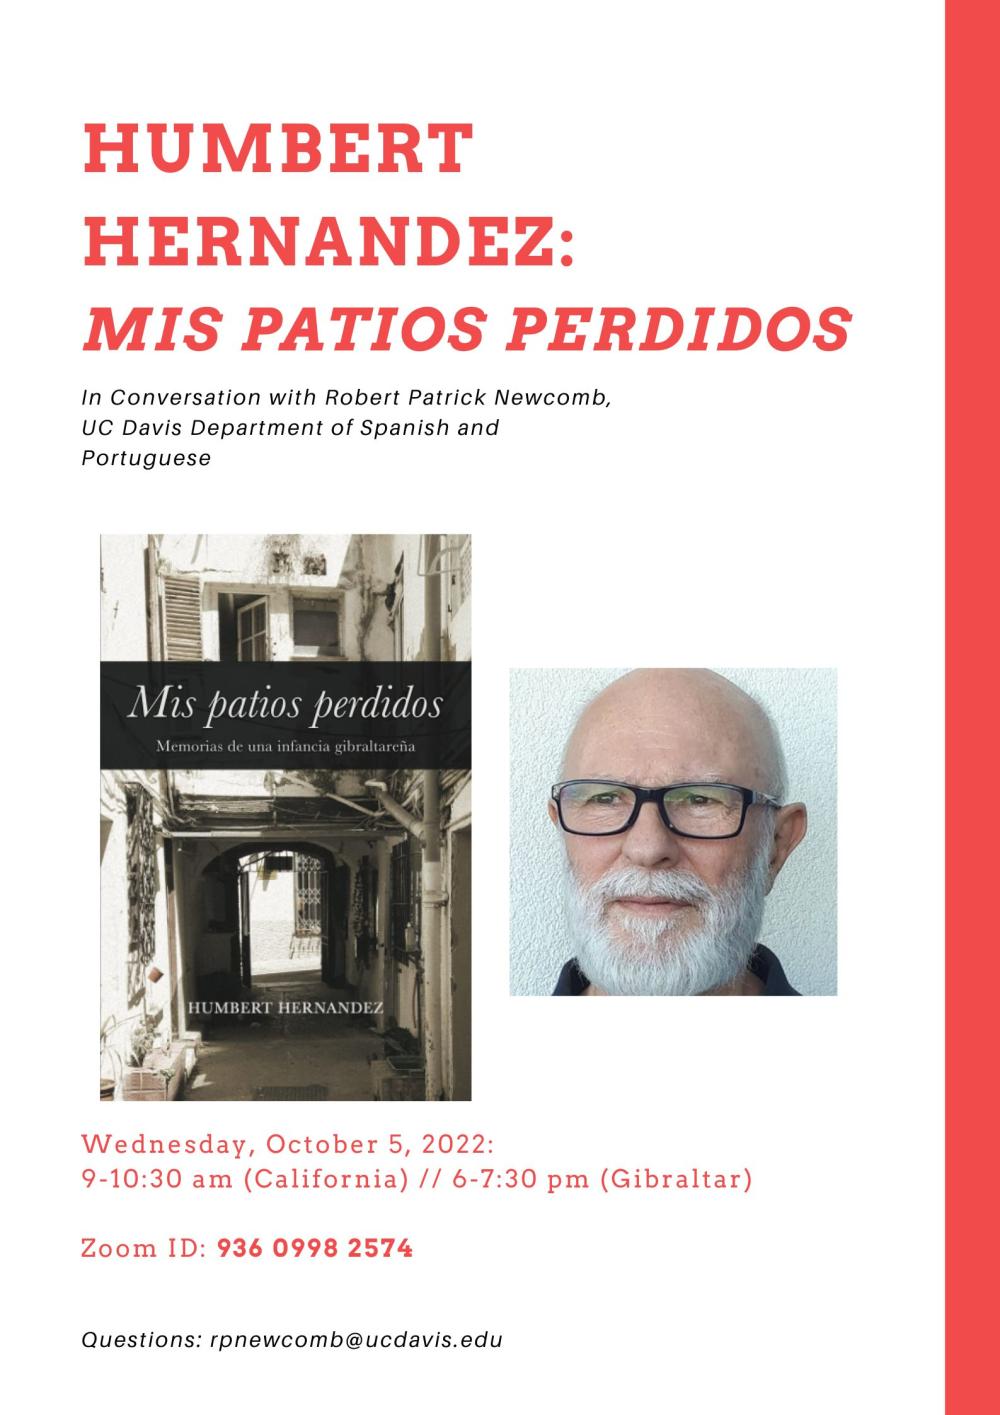 A flyer for Robert Newcombs upcoming interview with author Humbert Hernandez